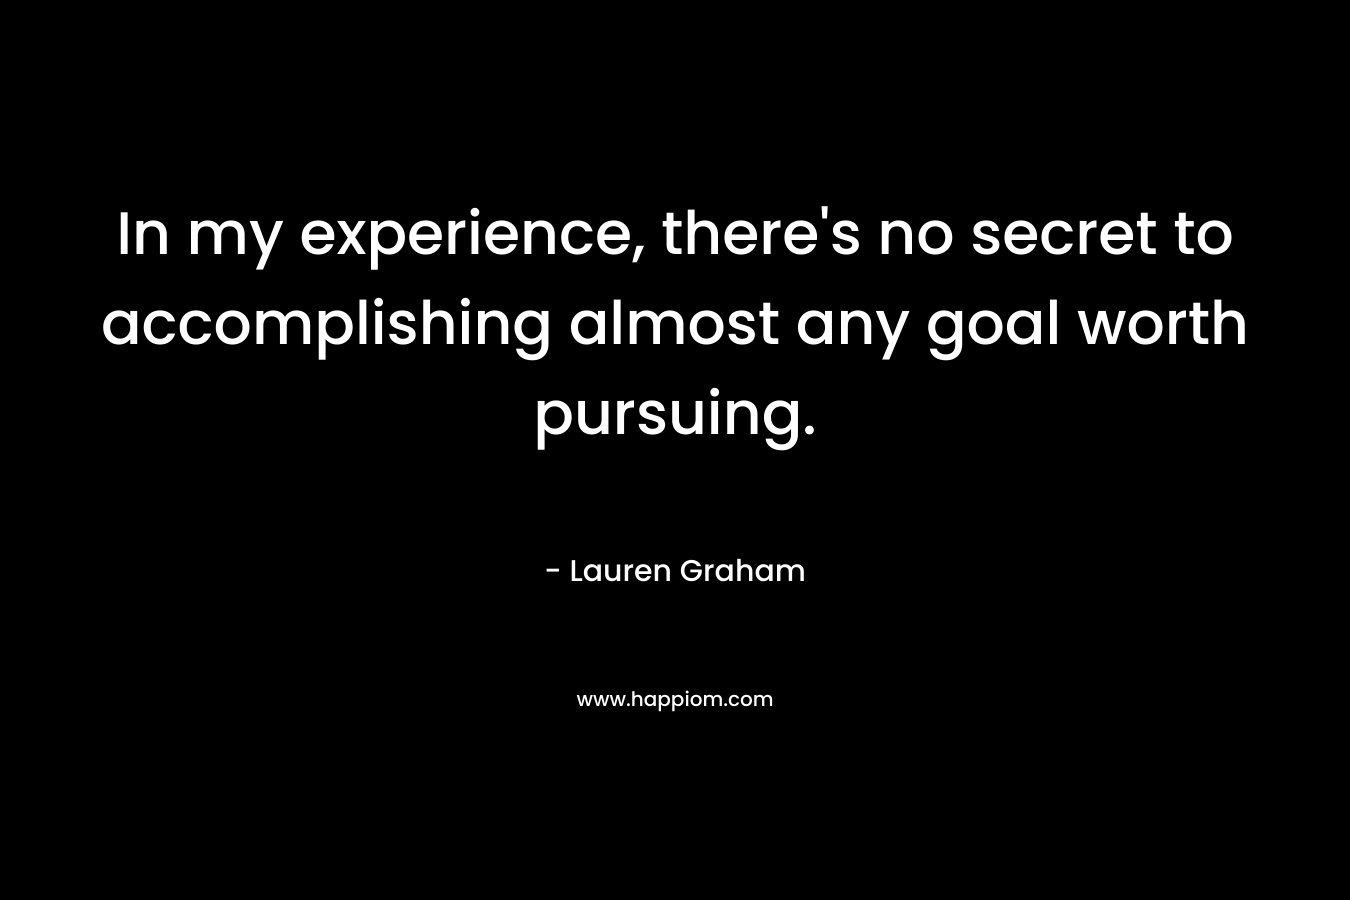 In my experience, there’s no secret to accomplishing almost any goal worth pursuing. – Lauren Graham